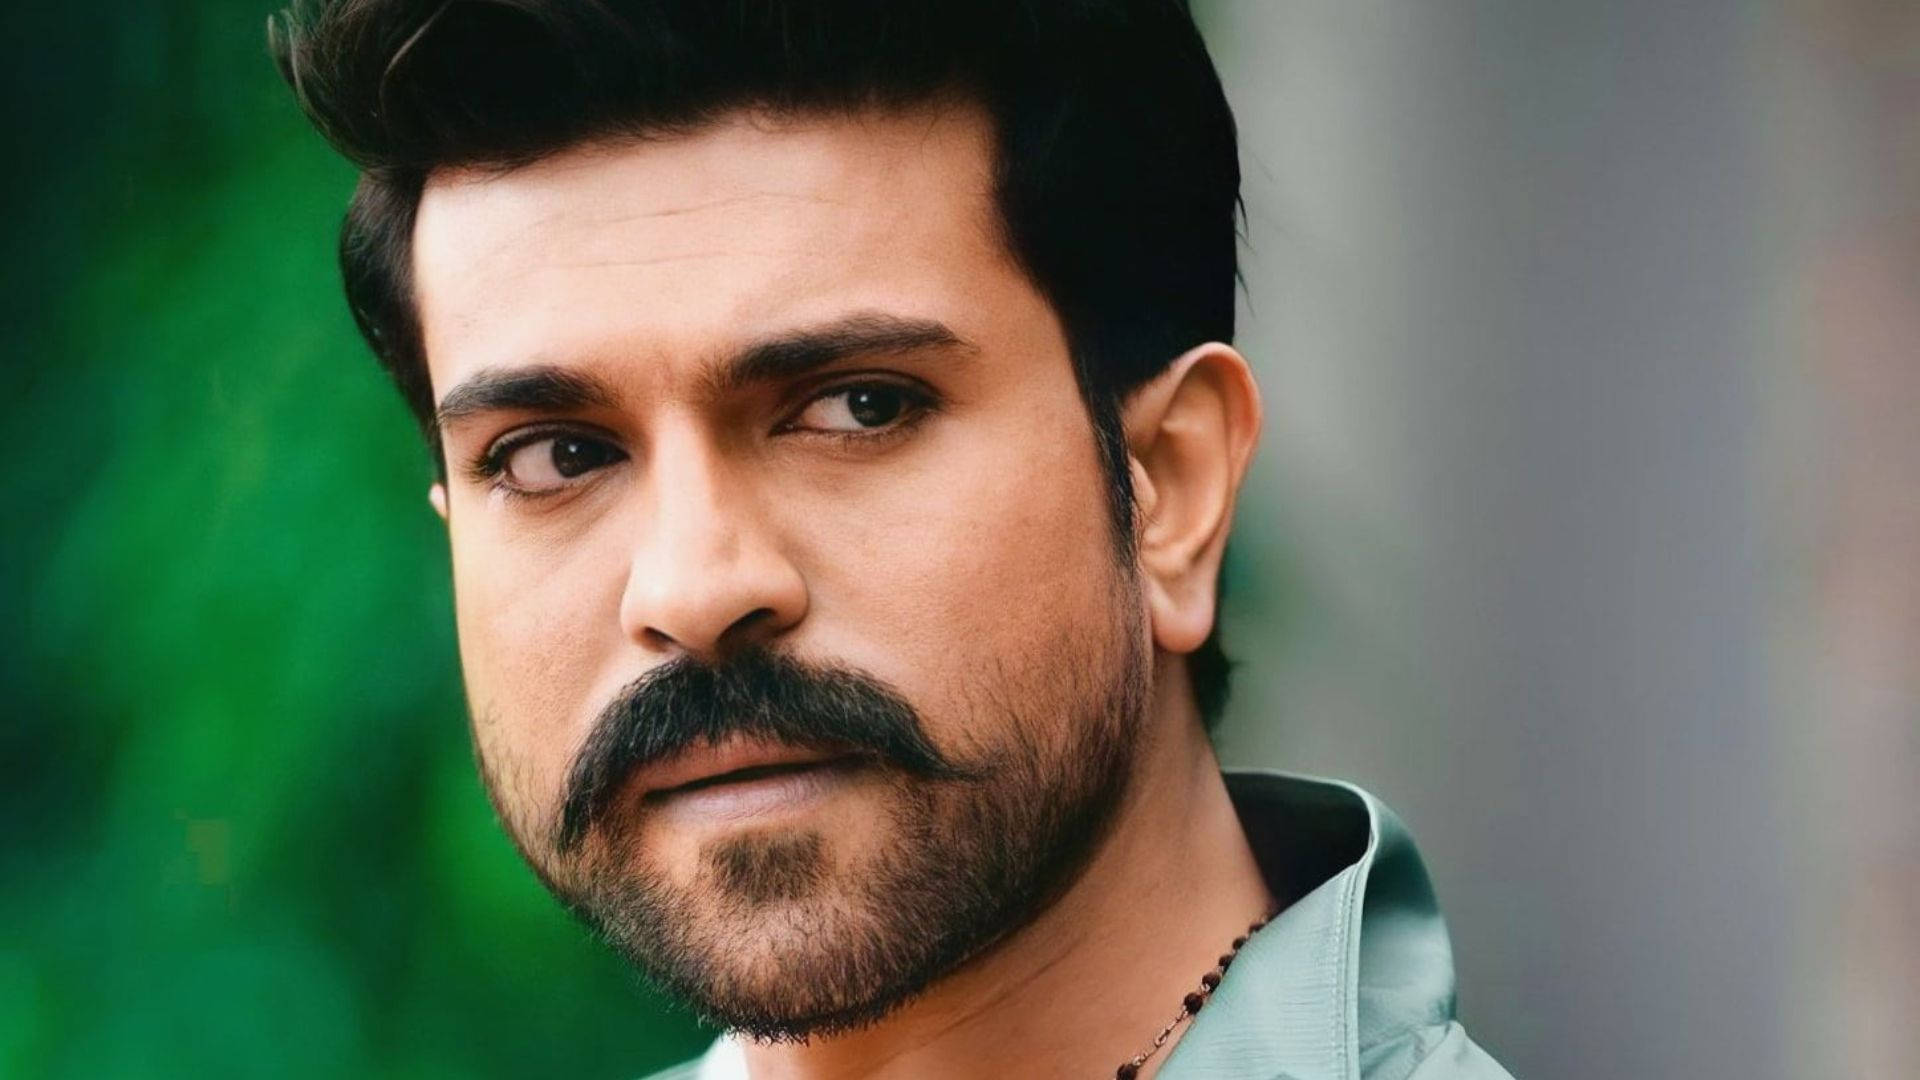 Remarkable Hd Image Of Telugu Actor Ram Charan Background